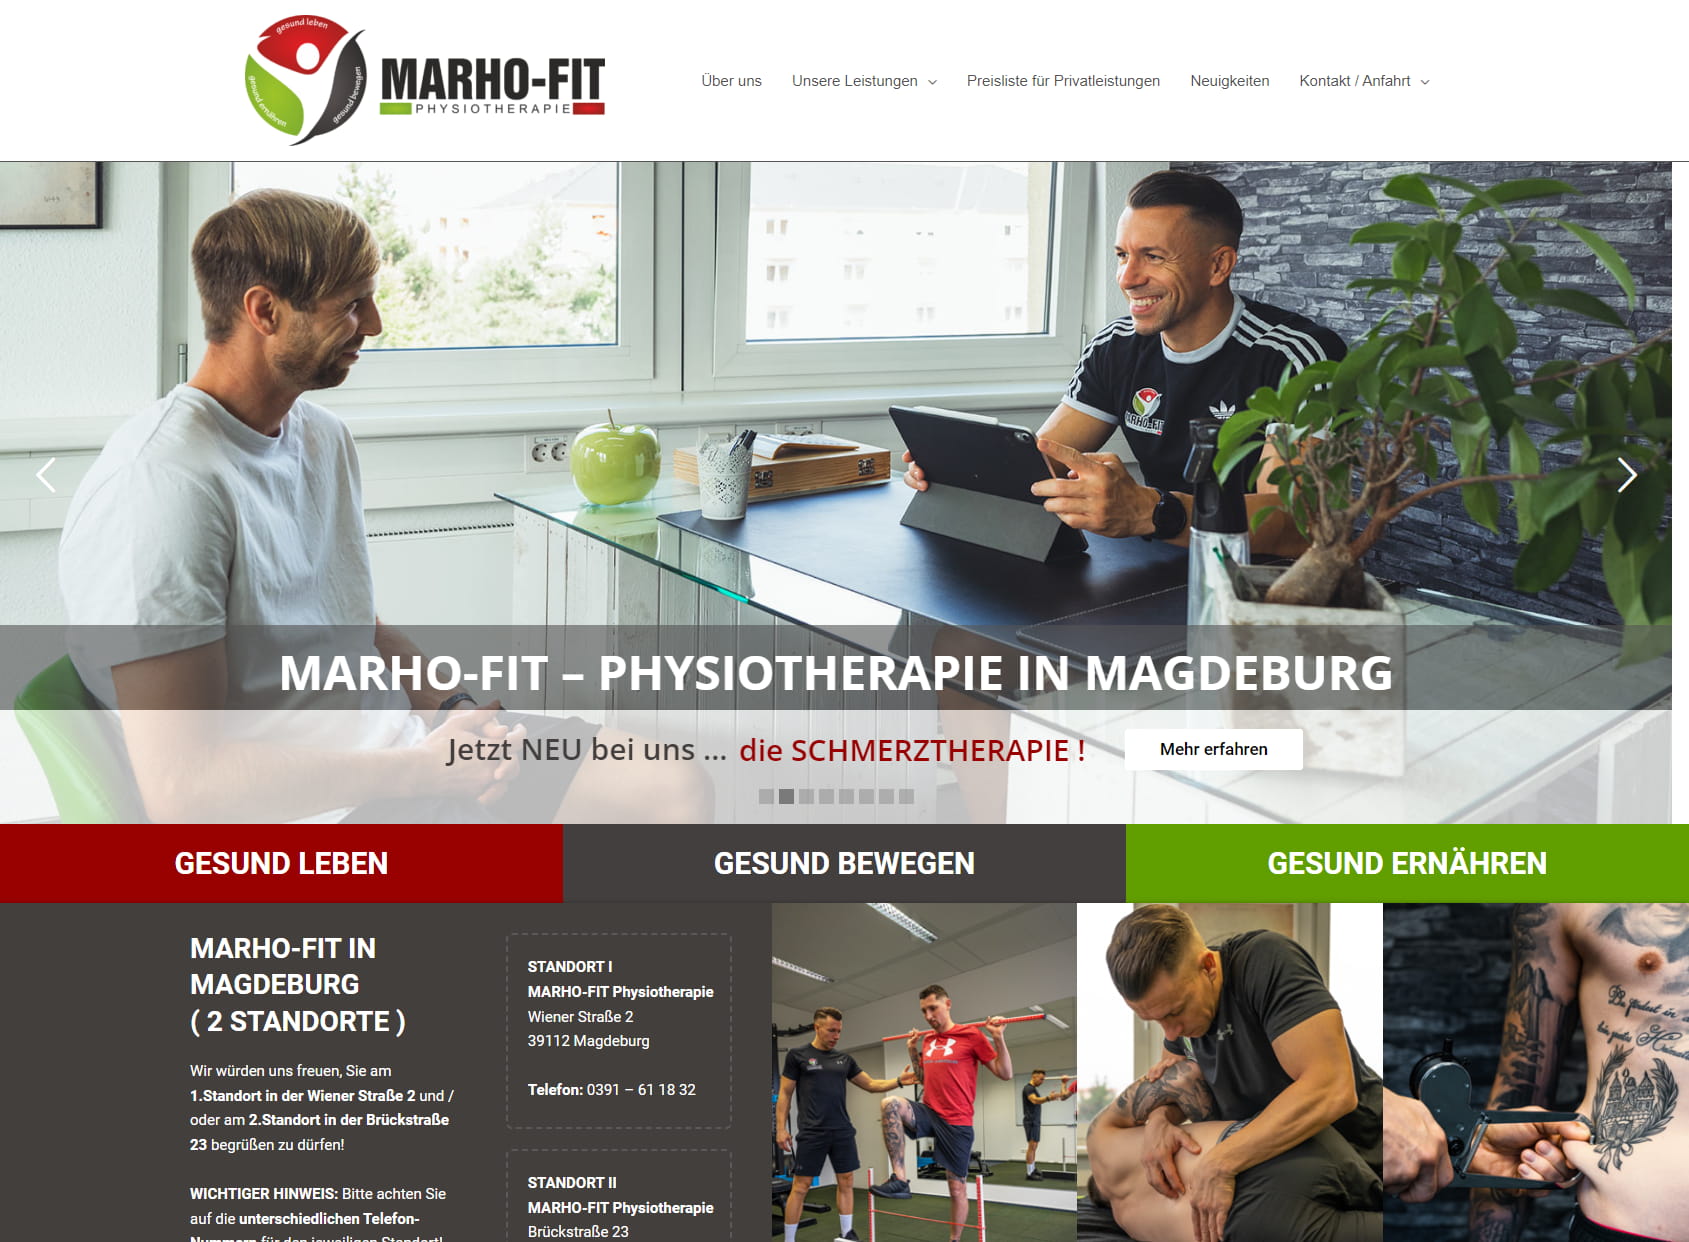 MARHO-FIT Physiotherapie in Magdeburg Sudenburg